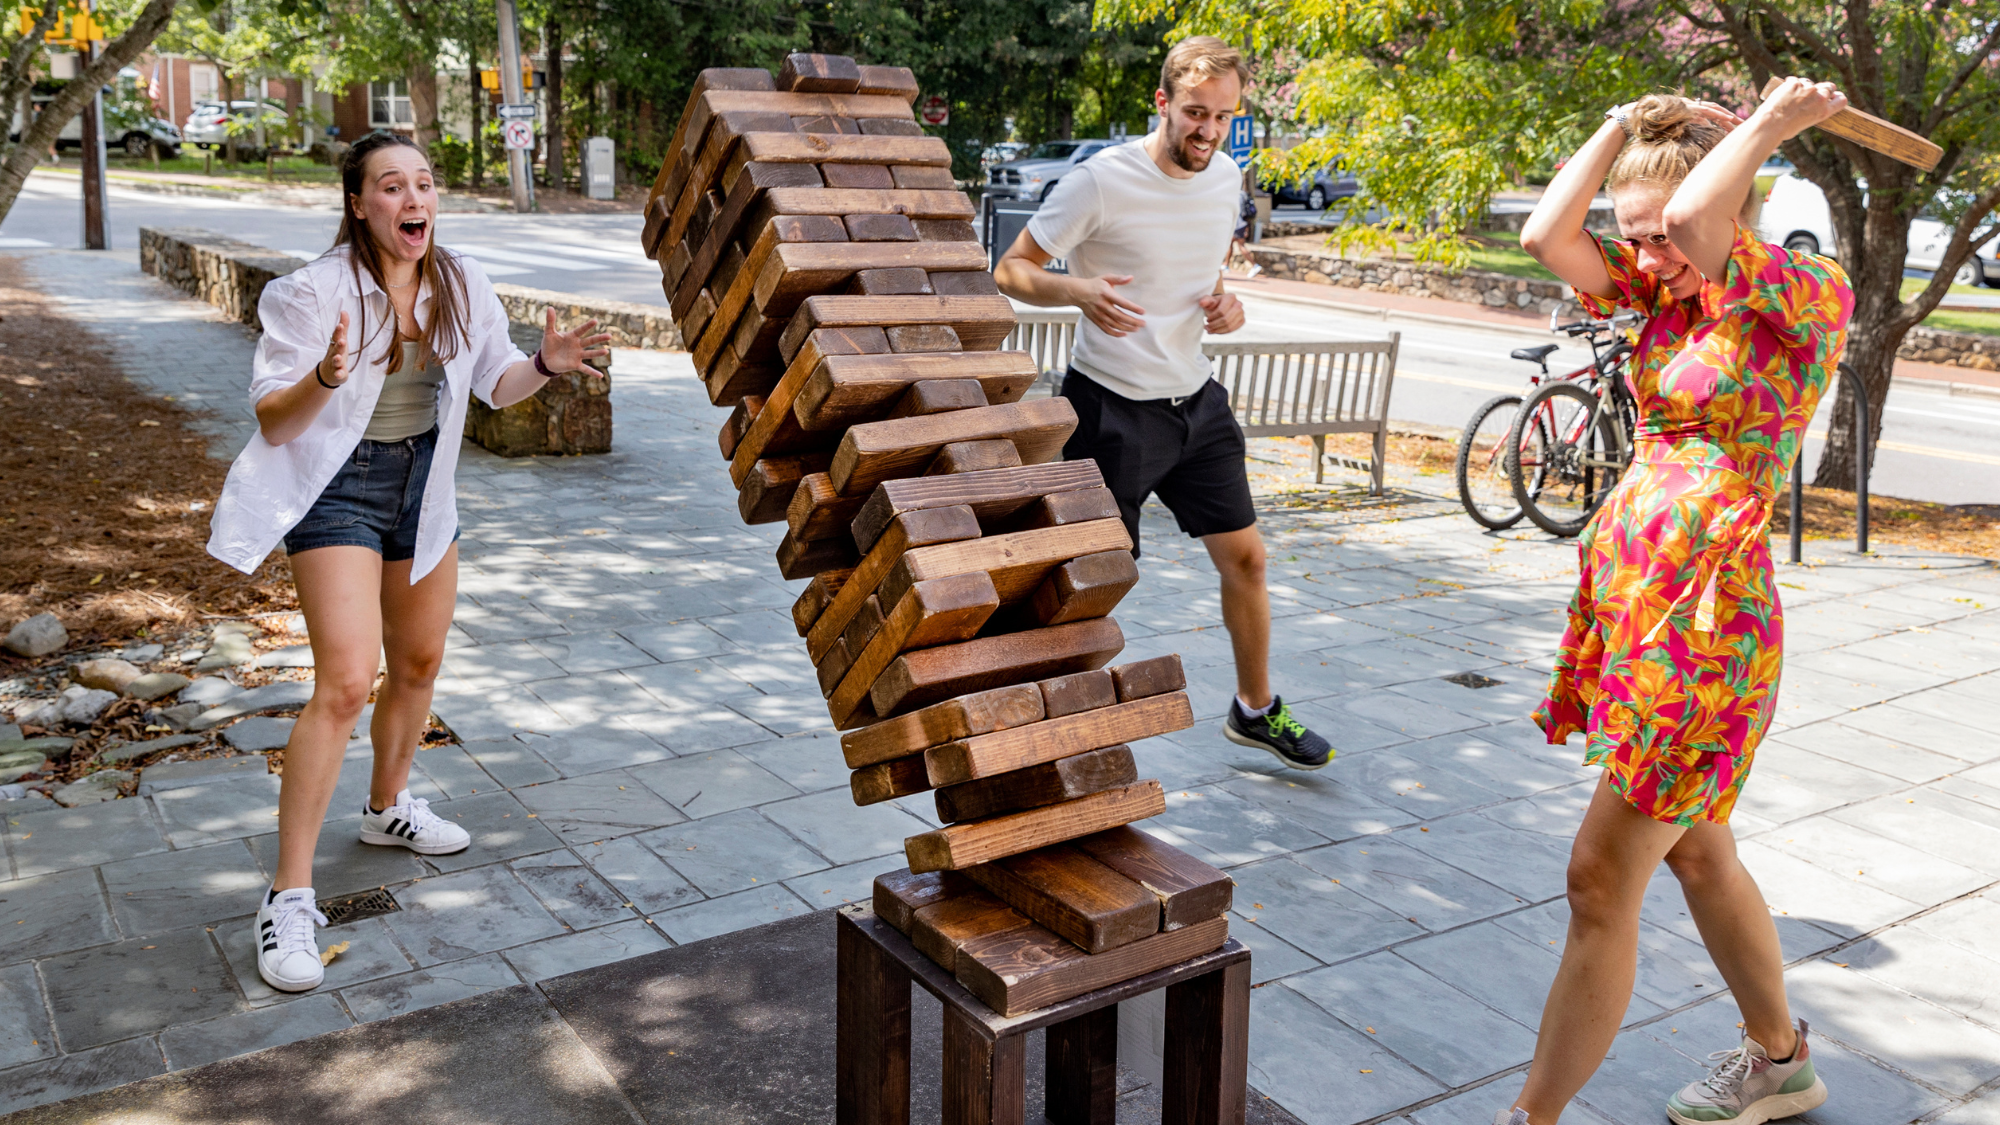 Tall Jenga stack tumbles to the ground. The people playing look excited and happy.